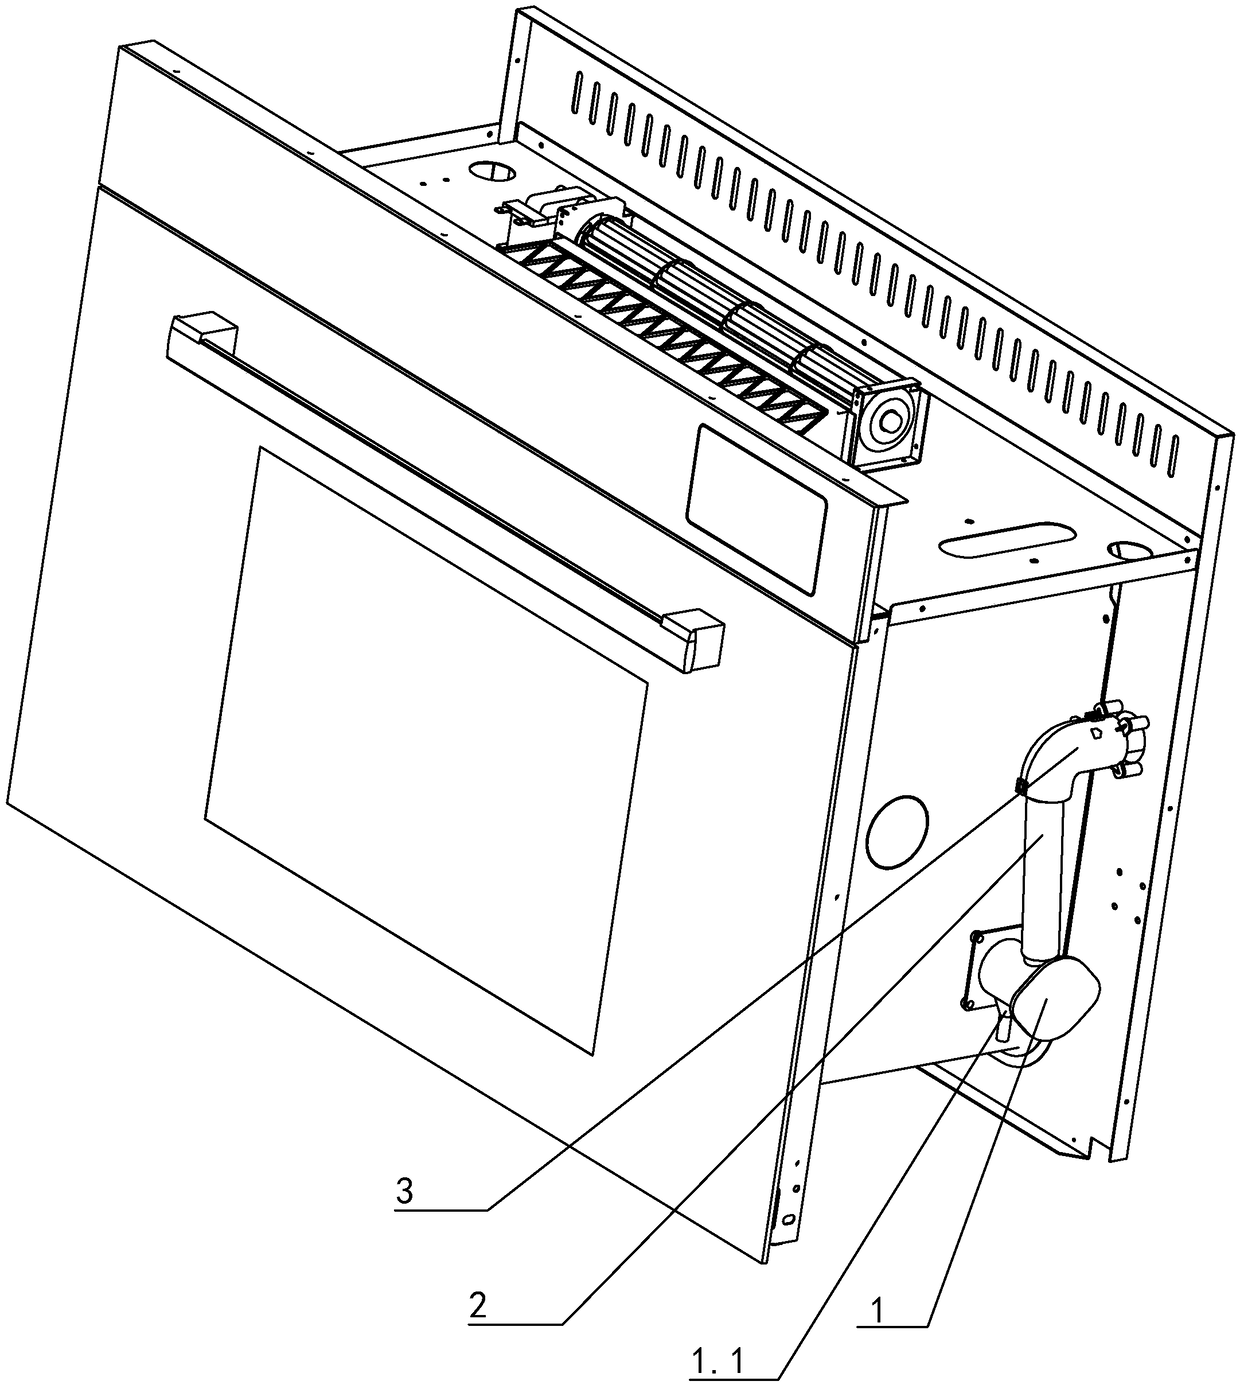 Exhaust pipe and exhaust structure of integrated cooker or electric oven baking oven